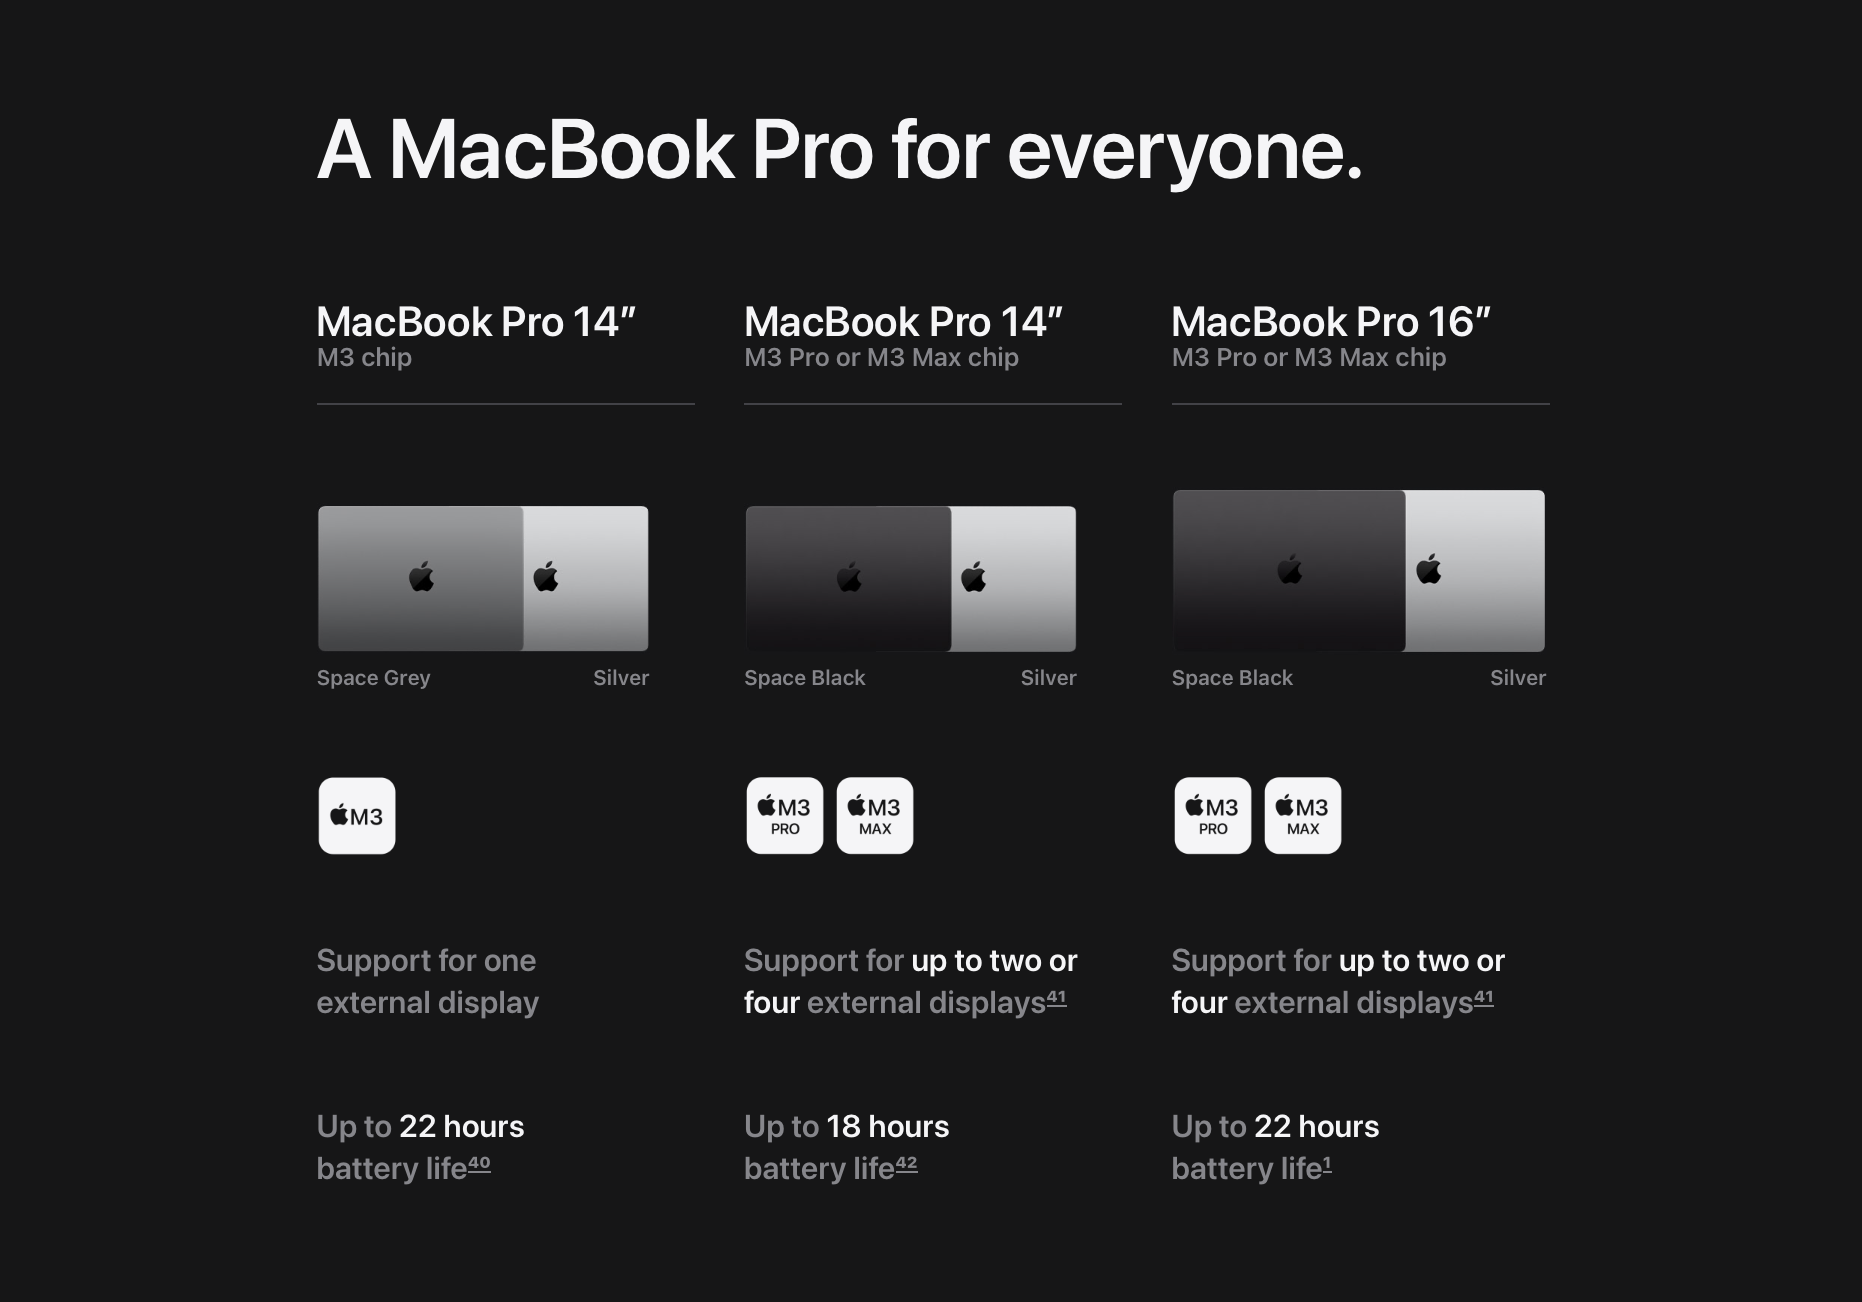 M3 Pro or M3 Max MacBook Pro: Which one should you buy? - Mark Ellis Reviews